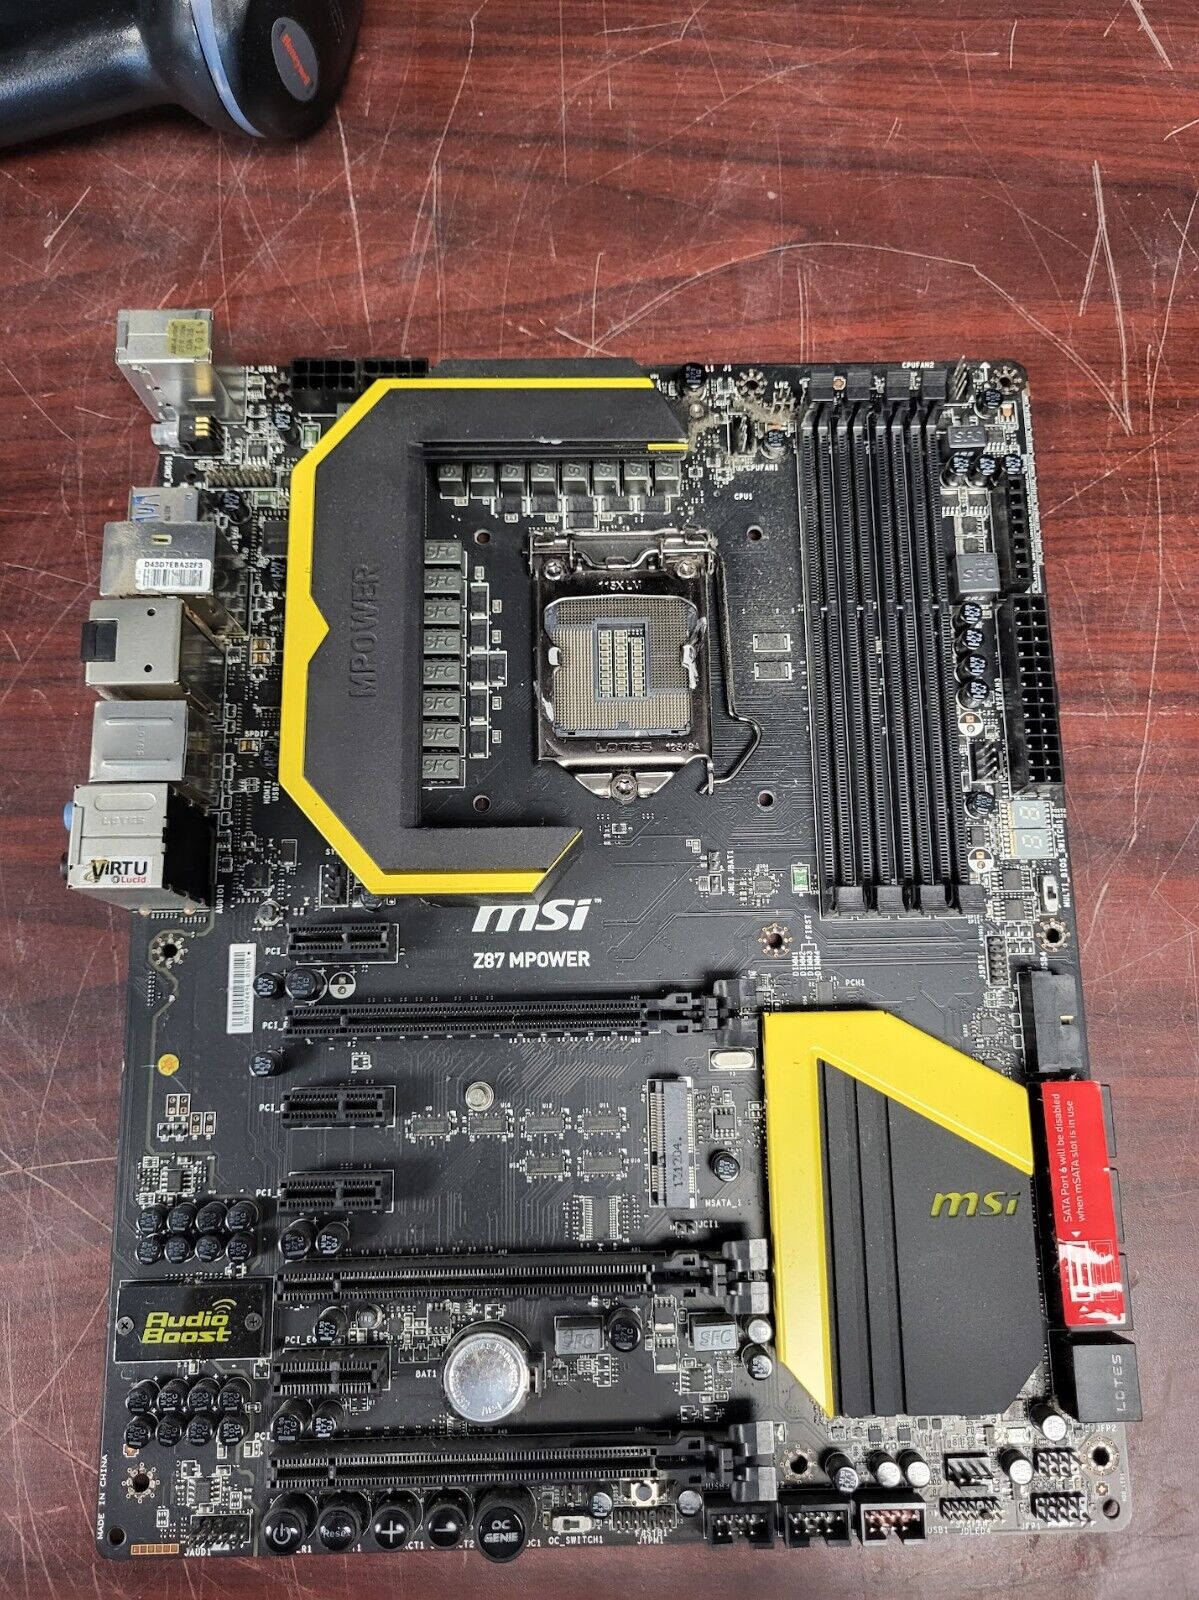 MSI Z87 MPOWER USB 3.0 ATX Motherboard Tested/Working #73